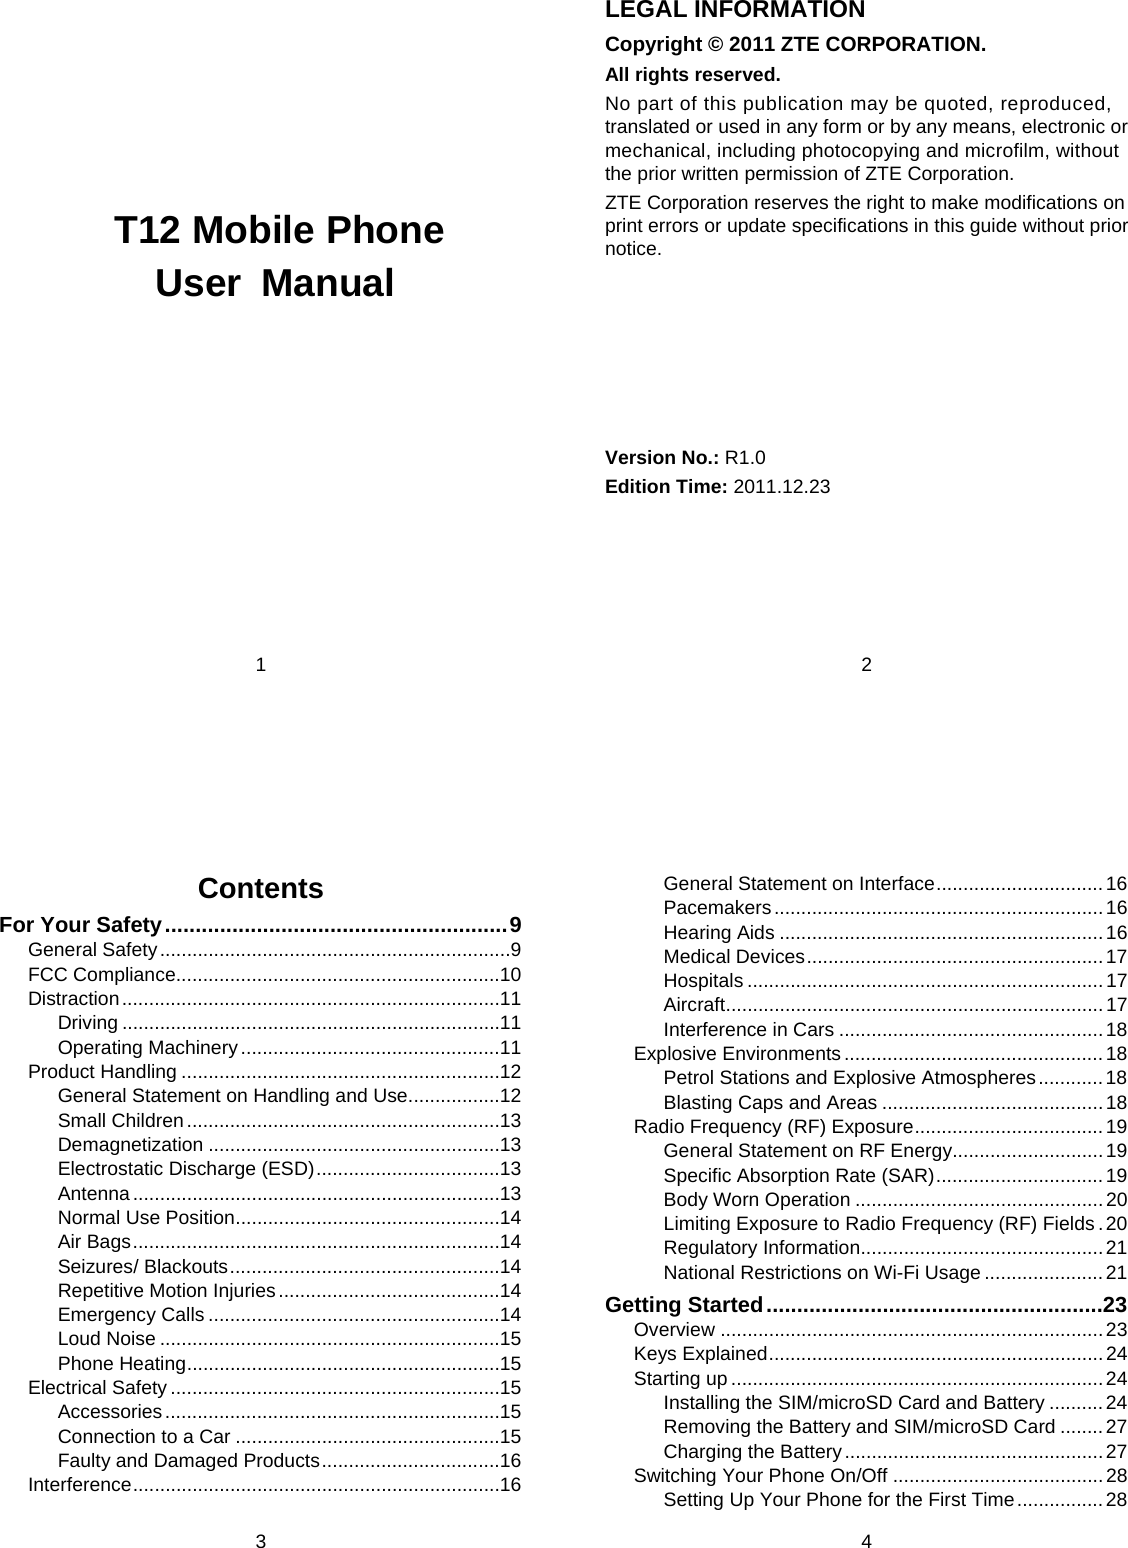 1     T12 Mobile Phone User Manual   2 LEGAL INFORMATION Copyright © 2011 ZTE CORPORATION. All rights reserved. No part of this publication may be quoted, reproduced, translated or used in any form or by any means, electronic or mechanical, including photocopying and microfilm, without the prior written permission of ZTE Corporation. ZTE Corporation reserves the right to make modifications on print errors or update specifications in this guide without prior notice.       Version No.: R1.0 Edition Time: 2011.12.23  3 Contents For Your Safety ........................................................ 9General Safety ................................................................. 9FCC Compliance............................................................ 10Distraction ...................................................................... 11Driving ...................................................................... 11Operating Machinery ................................................ 11Product Handling ........................................................... 12General Statement on Handling and Use ................. 12Small Children .......................................................... 13Demagnetization ...................................................... 13Electrostatic Discharge (ESD) .................................. 13Antenna .................................................................... 13Normal Use Position ................................................. 14Air Bags .................................................................... 14Seizures/ Blackouts .................................................. 14Repetitive Motion Injuries ......................................... 14Emergency Calls ...................................................... 14Loud Noise ............................................................... 15Phone Heating .......................................................... 15Electrical Safety ............................................................. 15Accessories .............................................................. 15Connection to a Car ................................................. 15Faulty and Damaged Products ................................. 16Interference .................................................................... 164 General Statement on Interface ............................... 16Pacemakers ............................................................. 16Hearing Aids ............................................................ 16Medical Devices ....................................................... 17Hospitals .................................................................. 17Aircraft ...................................................................... 17Interference in Cars ................................................. 18Explosive Environments ................................................ 18Petrol Stations and Explosive Atmospheres ............ 18Blasting Caps and Areas ......................................... 18Radio Frequency (RF) Exposure ................................... 19General Statement on RF Energy............................ 19Specific Absorption Rate (SAR) ............................... 19Body Worn Operation .............................................. 20Limiting Exposure to Radio Frequency (RF) Fields . 20Regulatory Information ............................................. 21National Restrictions on Wi-Fi Usage ...................... 21Getting Started ....................................................... 23Overview ....................................................................... 23Keys Explained .............................................................. 24Starting up ..................................................................... 24Installing the SIM/microSD Card and Battery .......... 24Removing the Battery and SIM/microSD Card ........ 27Charging the Battery ................................................ 27Switching Your Phone On/Off ....................................... 28Setting Up Your Phone for the First Time ................ 28